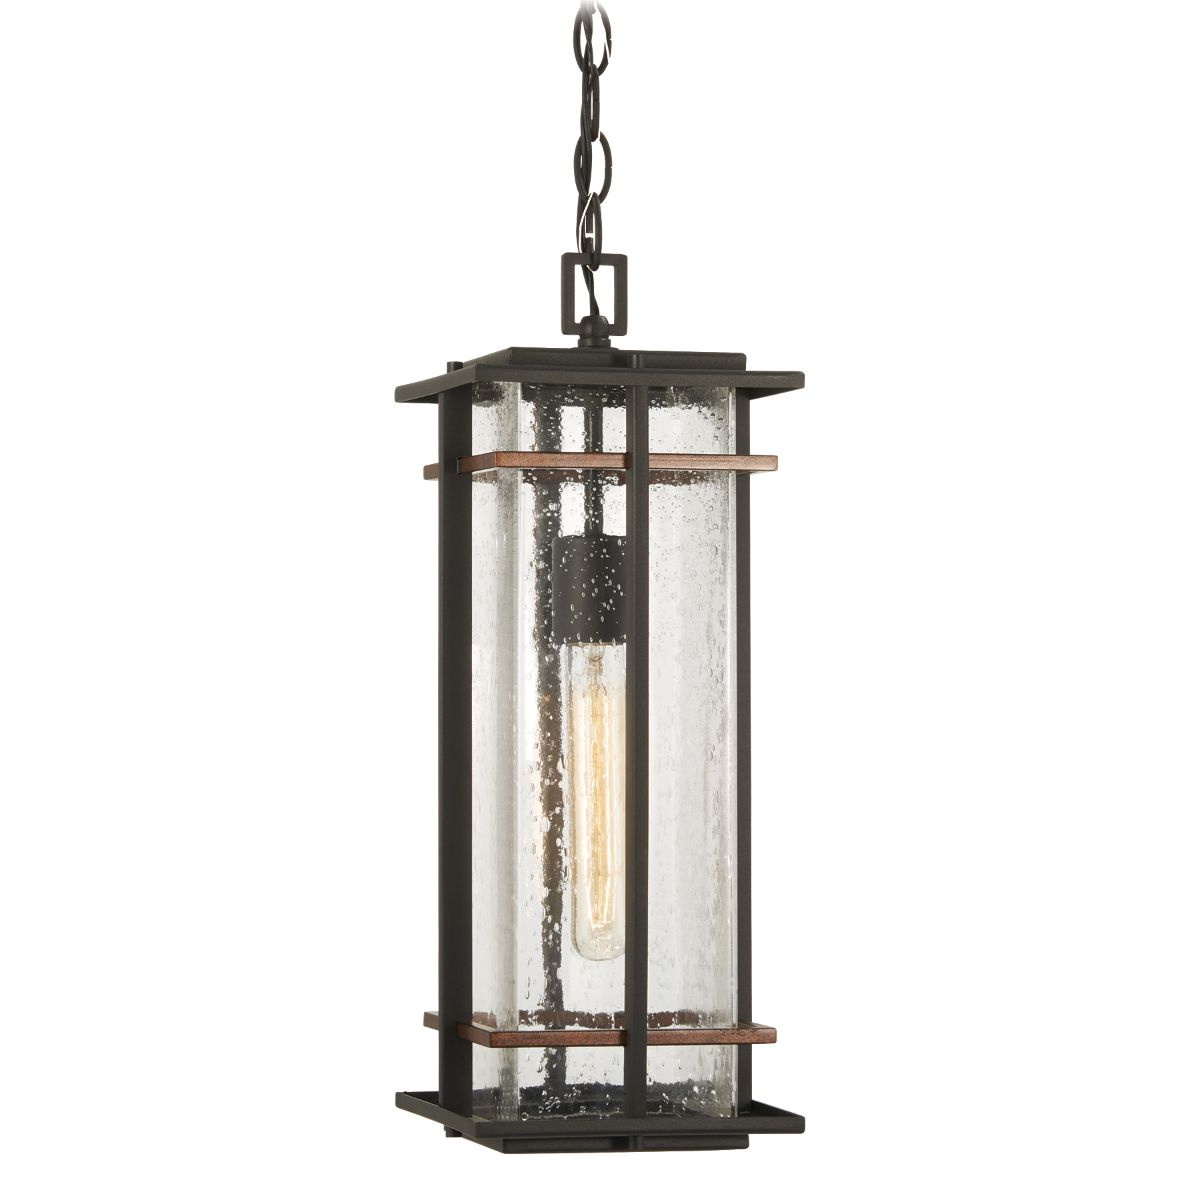 San Marcos 7 in. Outdoor Hanging Lantern Black & Antique Copper finish